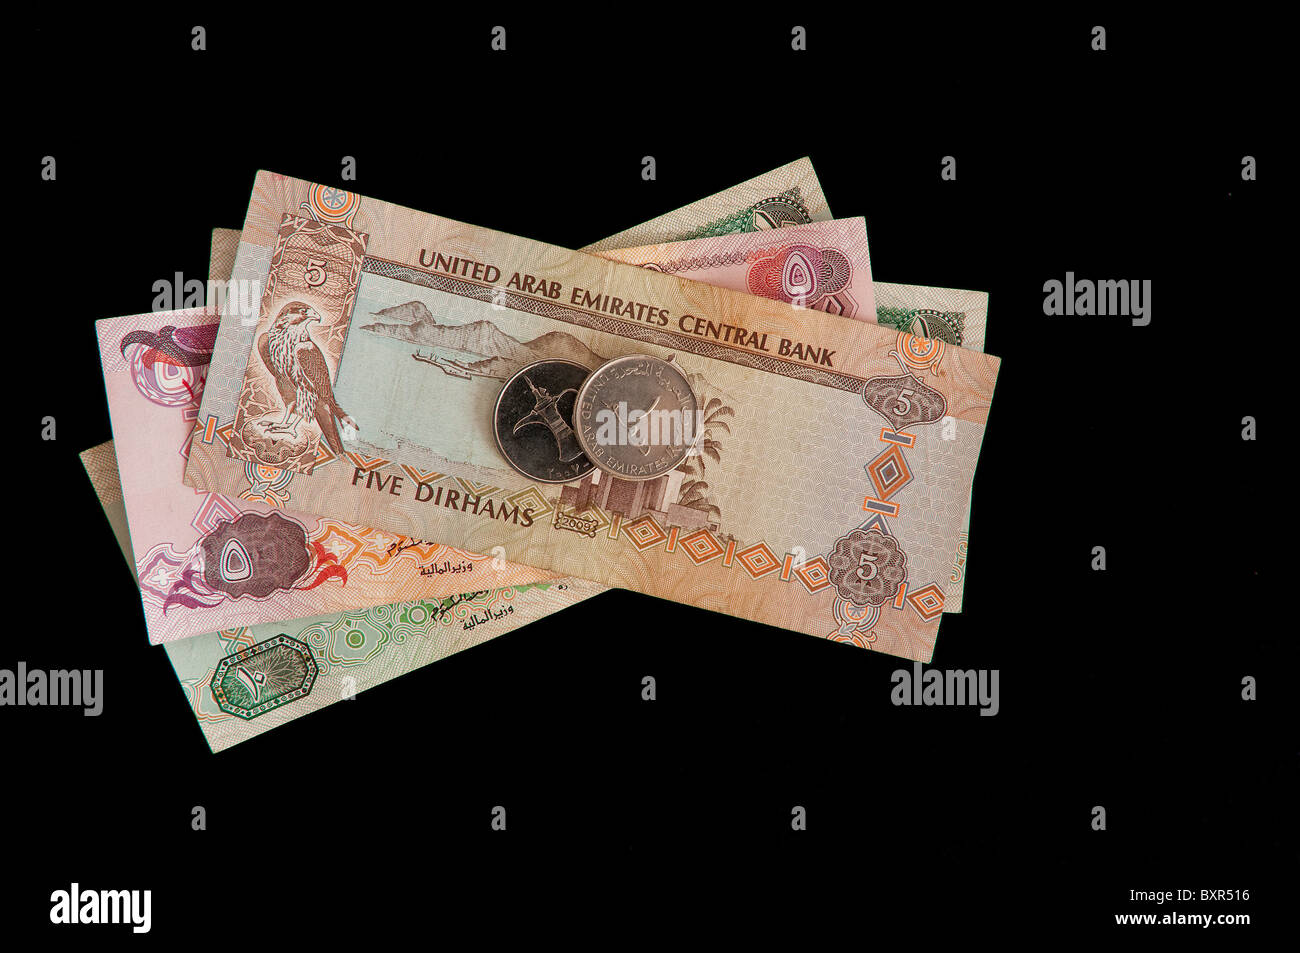 U.A.E. currency banknote Stock Photo